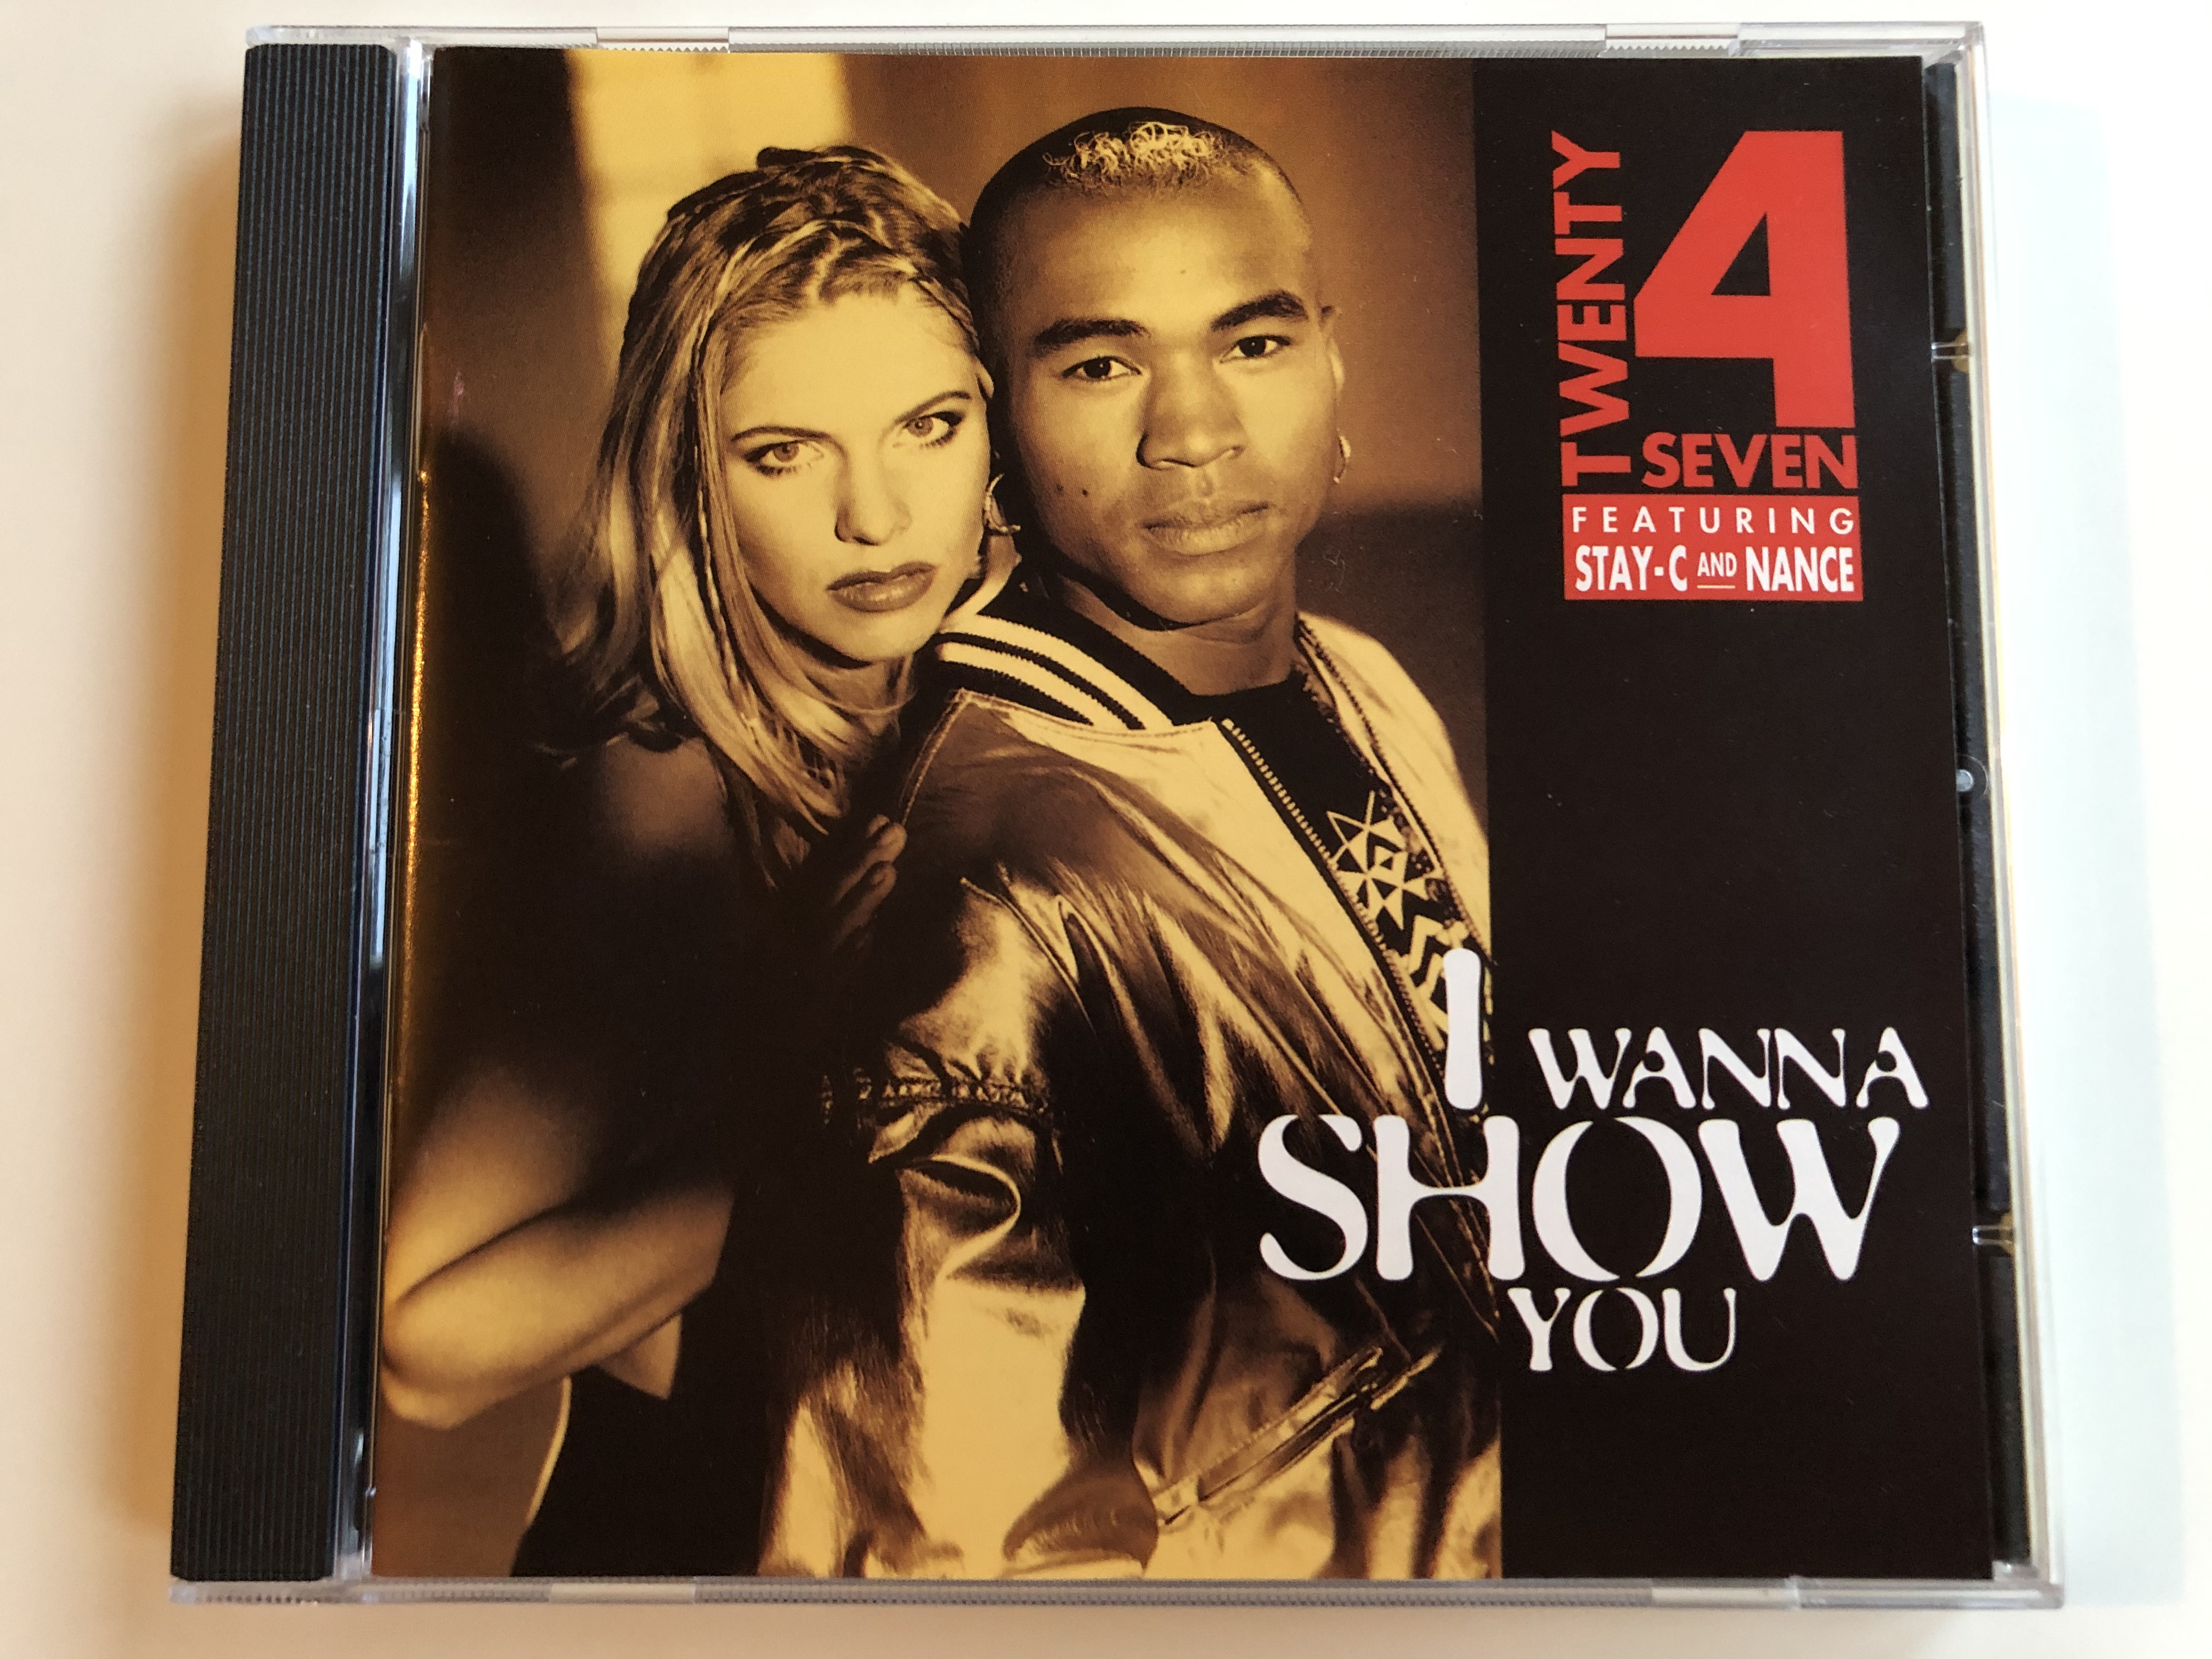 twenty-4-seven-featuring-stay-c-and-nance-i-wanna-show-you-record-express-audio-cd-rec-921-1-.jpg